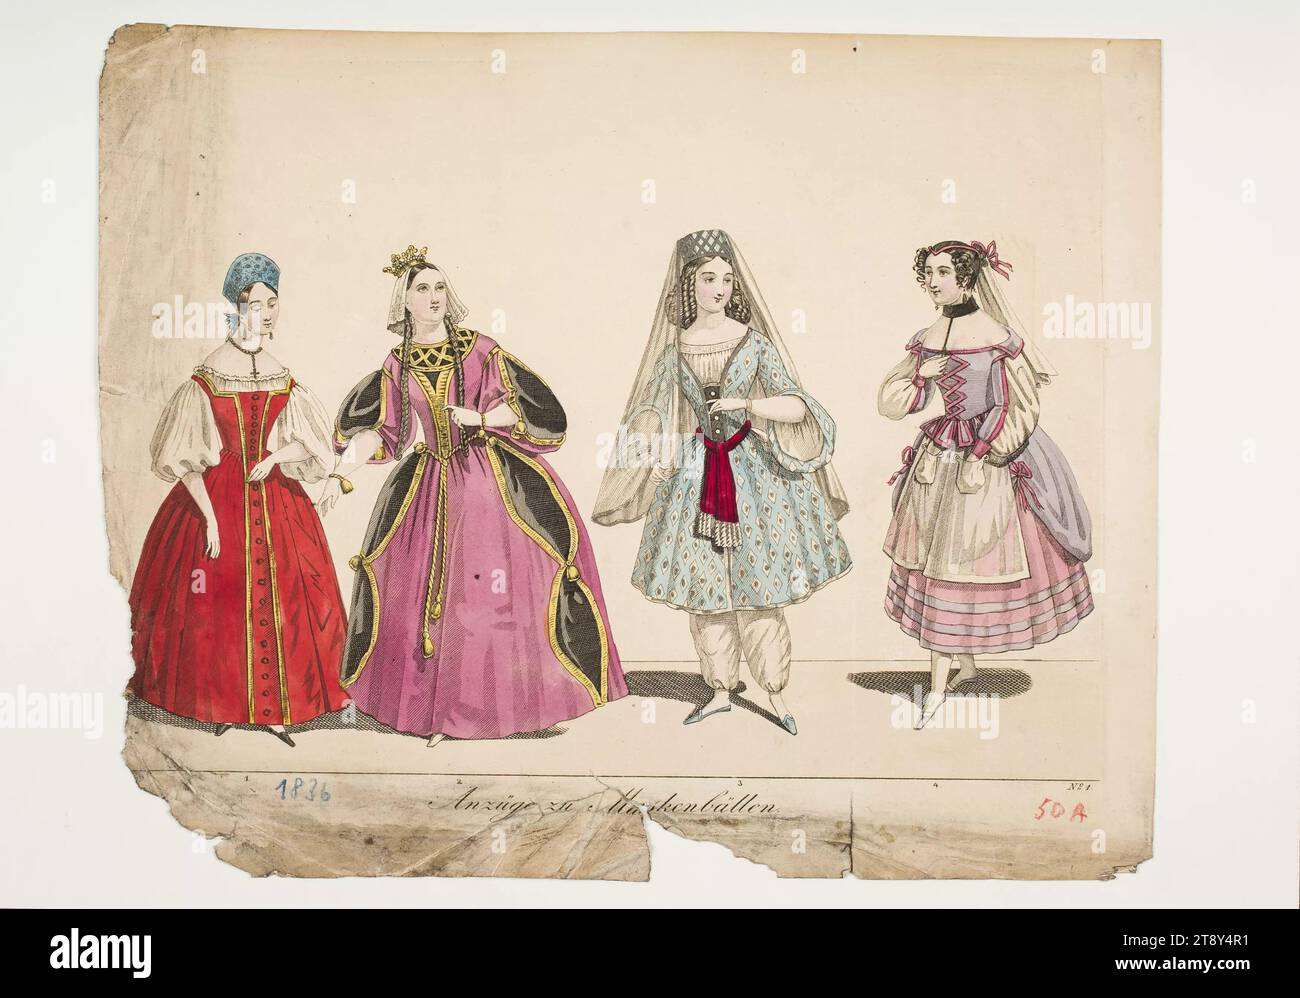 Fashion image: four figures, suits for masquerade balls, Unknown, 1836, paper, colored, copperplate engraving, height 27.5 cm, width 22 cm, plate size 26.2×20.3 cm, fashion, bourgeoisie, public festivals and celebrations, costumes, dance, nightlife, fashion boards, headdress, dress, dress: ball gown, dress for official occasions, woman, dress, dress, The Vienna Collection Stock Photo